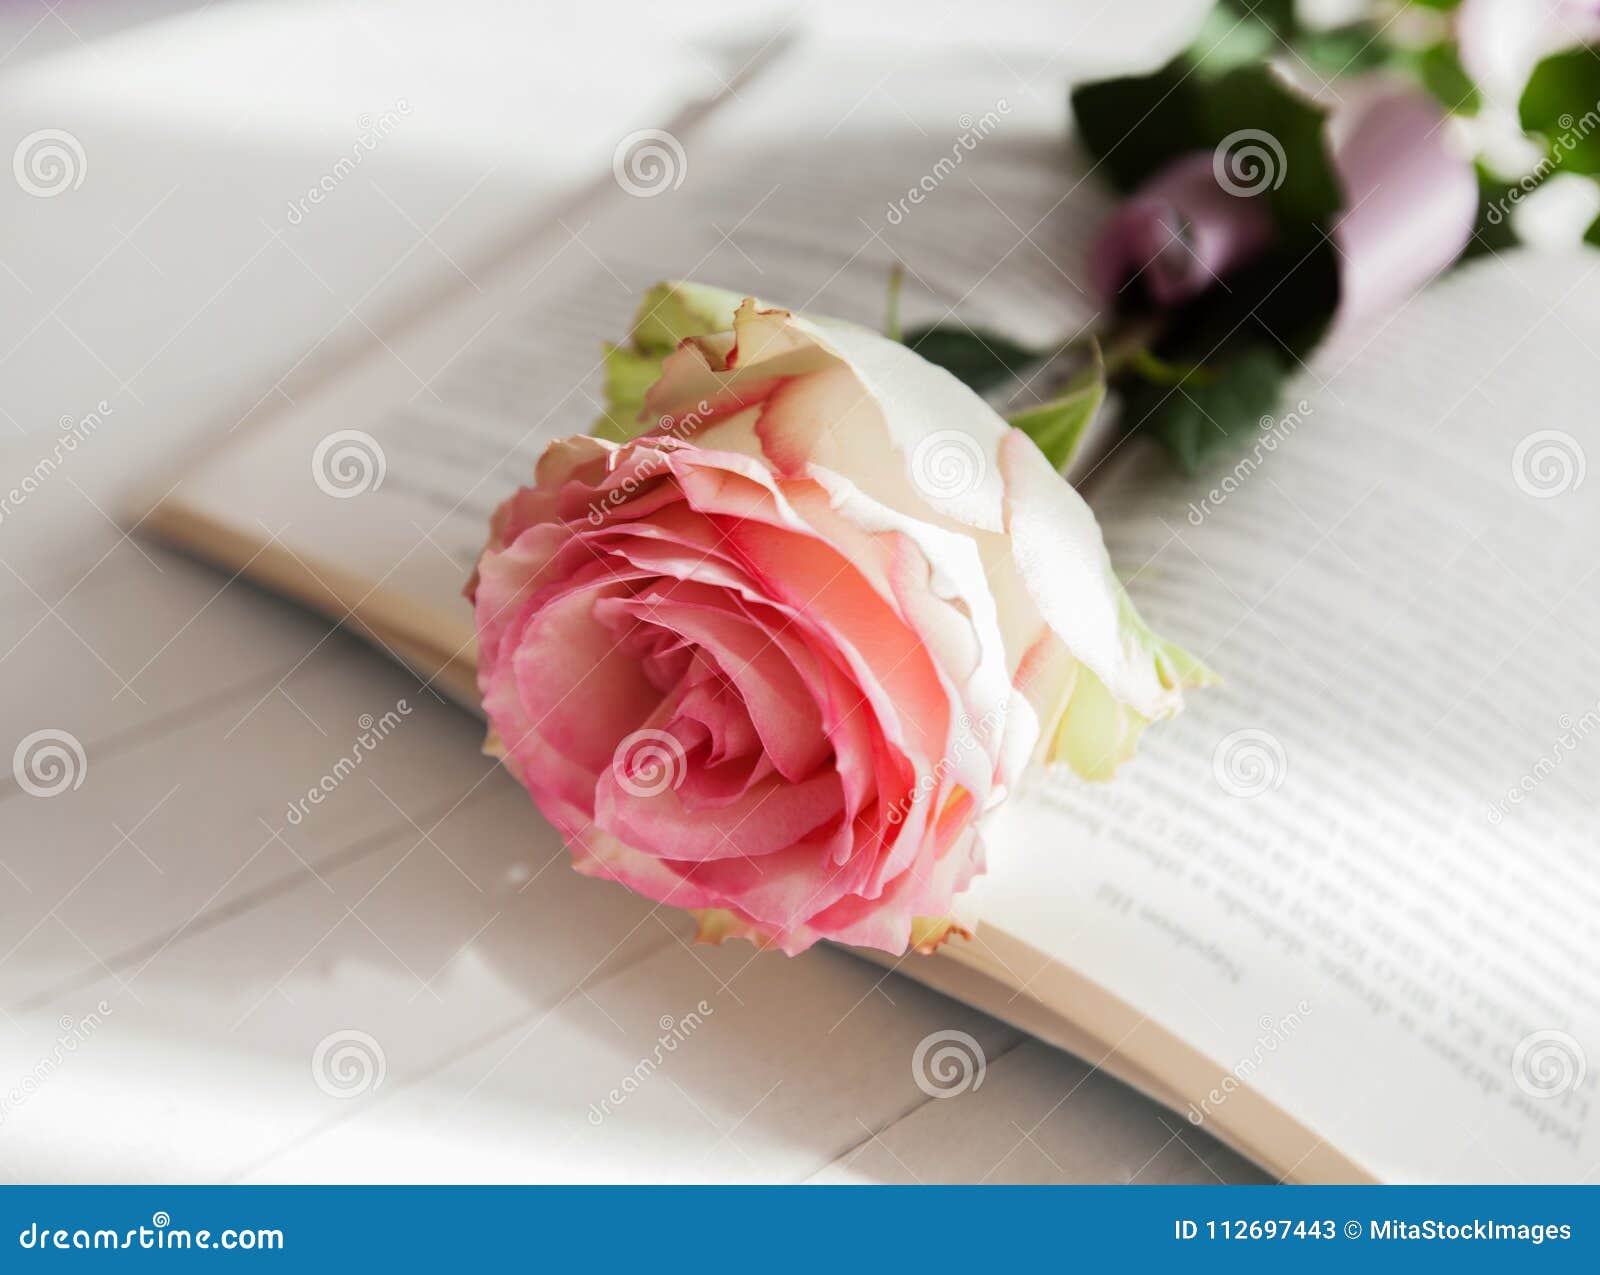 Rose and Book romance love stock image. Image of knowledge - 112697443